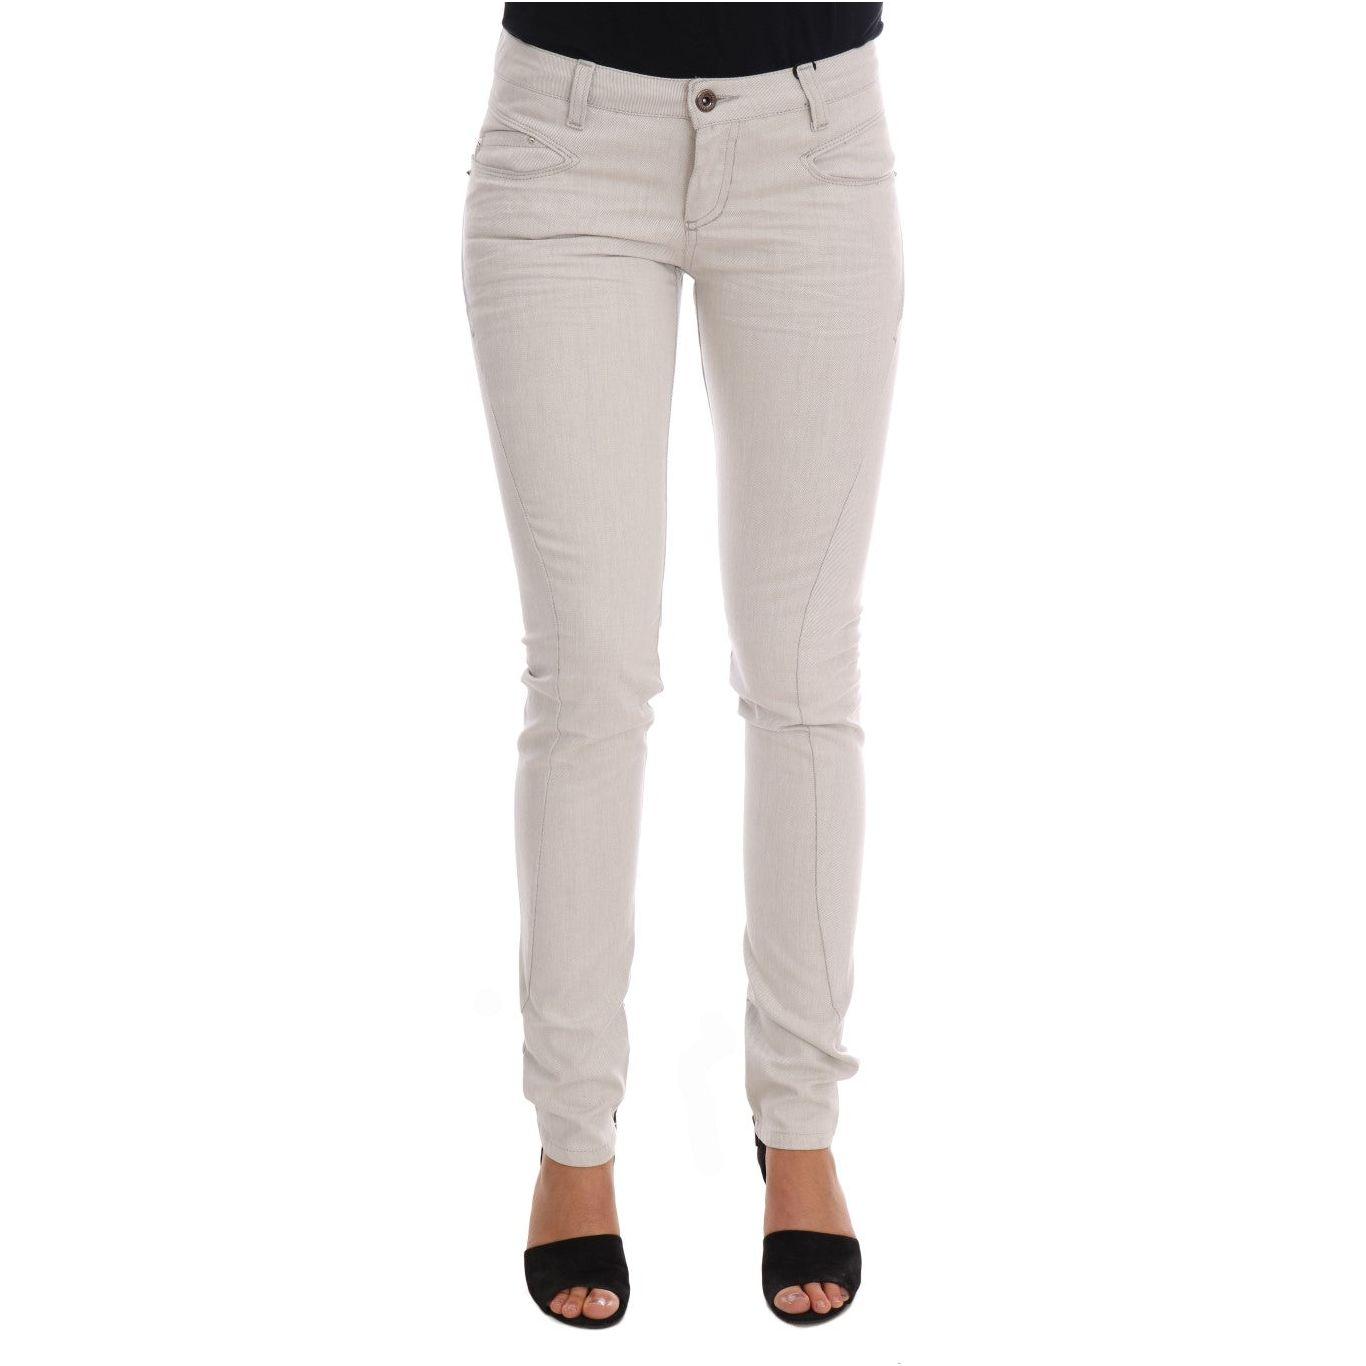 Costume National Chic White Slim-Fit Stretch Jeans white-cotton-stretch-slim-jeans 465909-white-cotton-stretch-slim-jeans.jpg